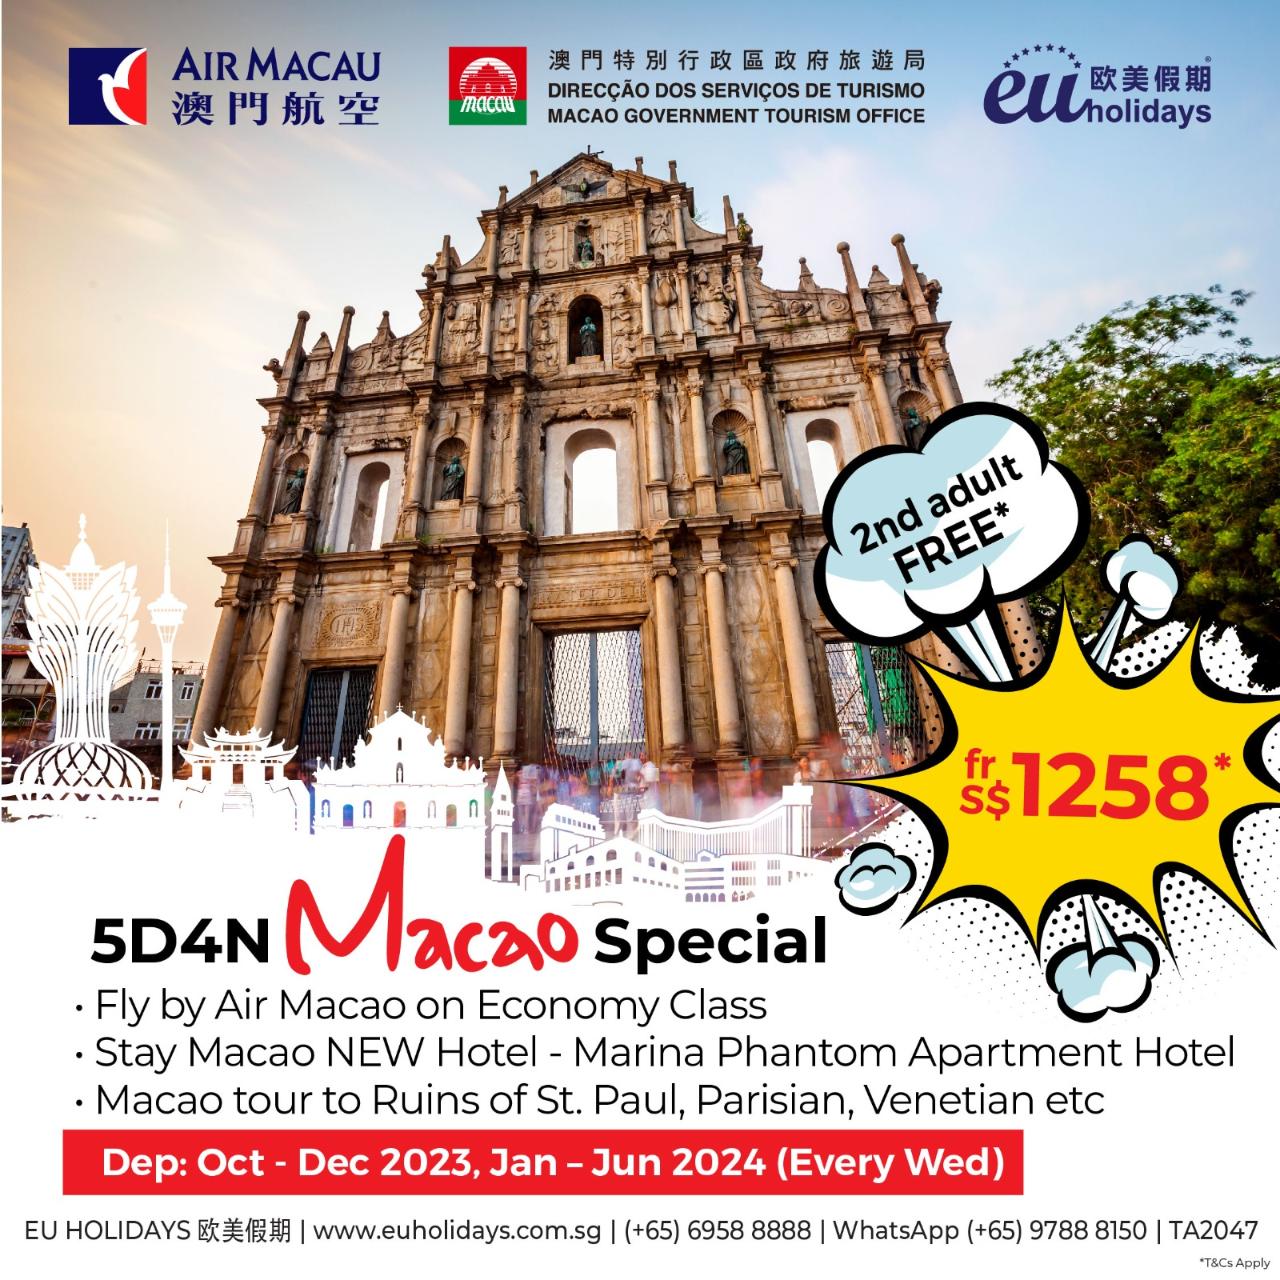 5D4N Macao Special By Air Macau 1for1 (2nd Adult FREE) Special Departure 